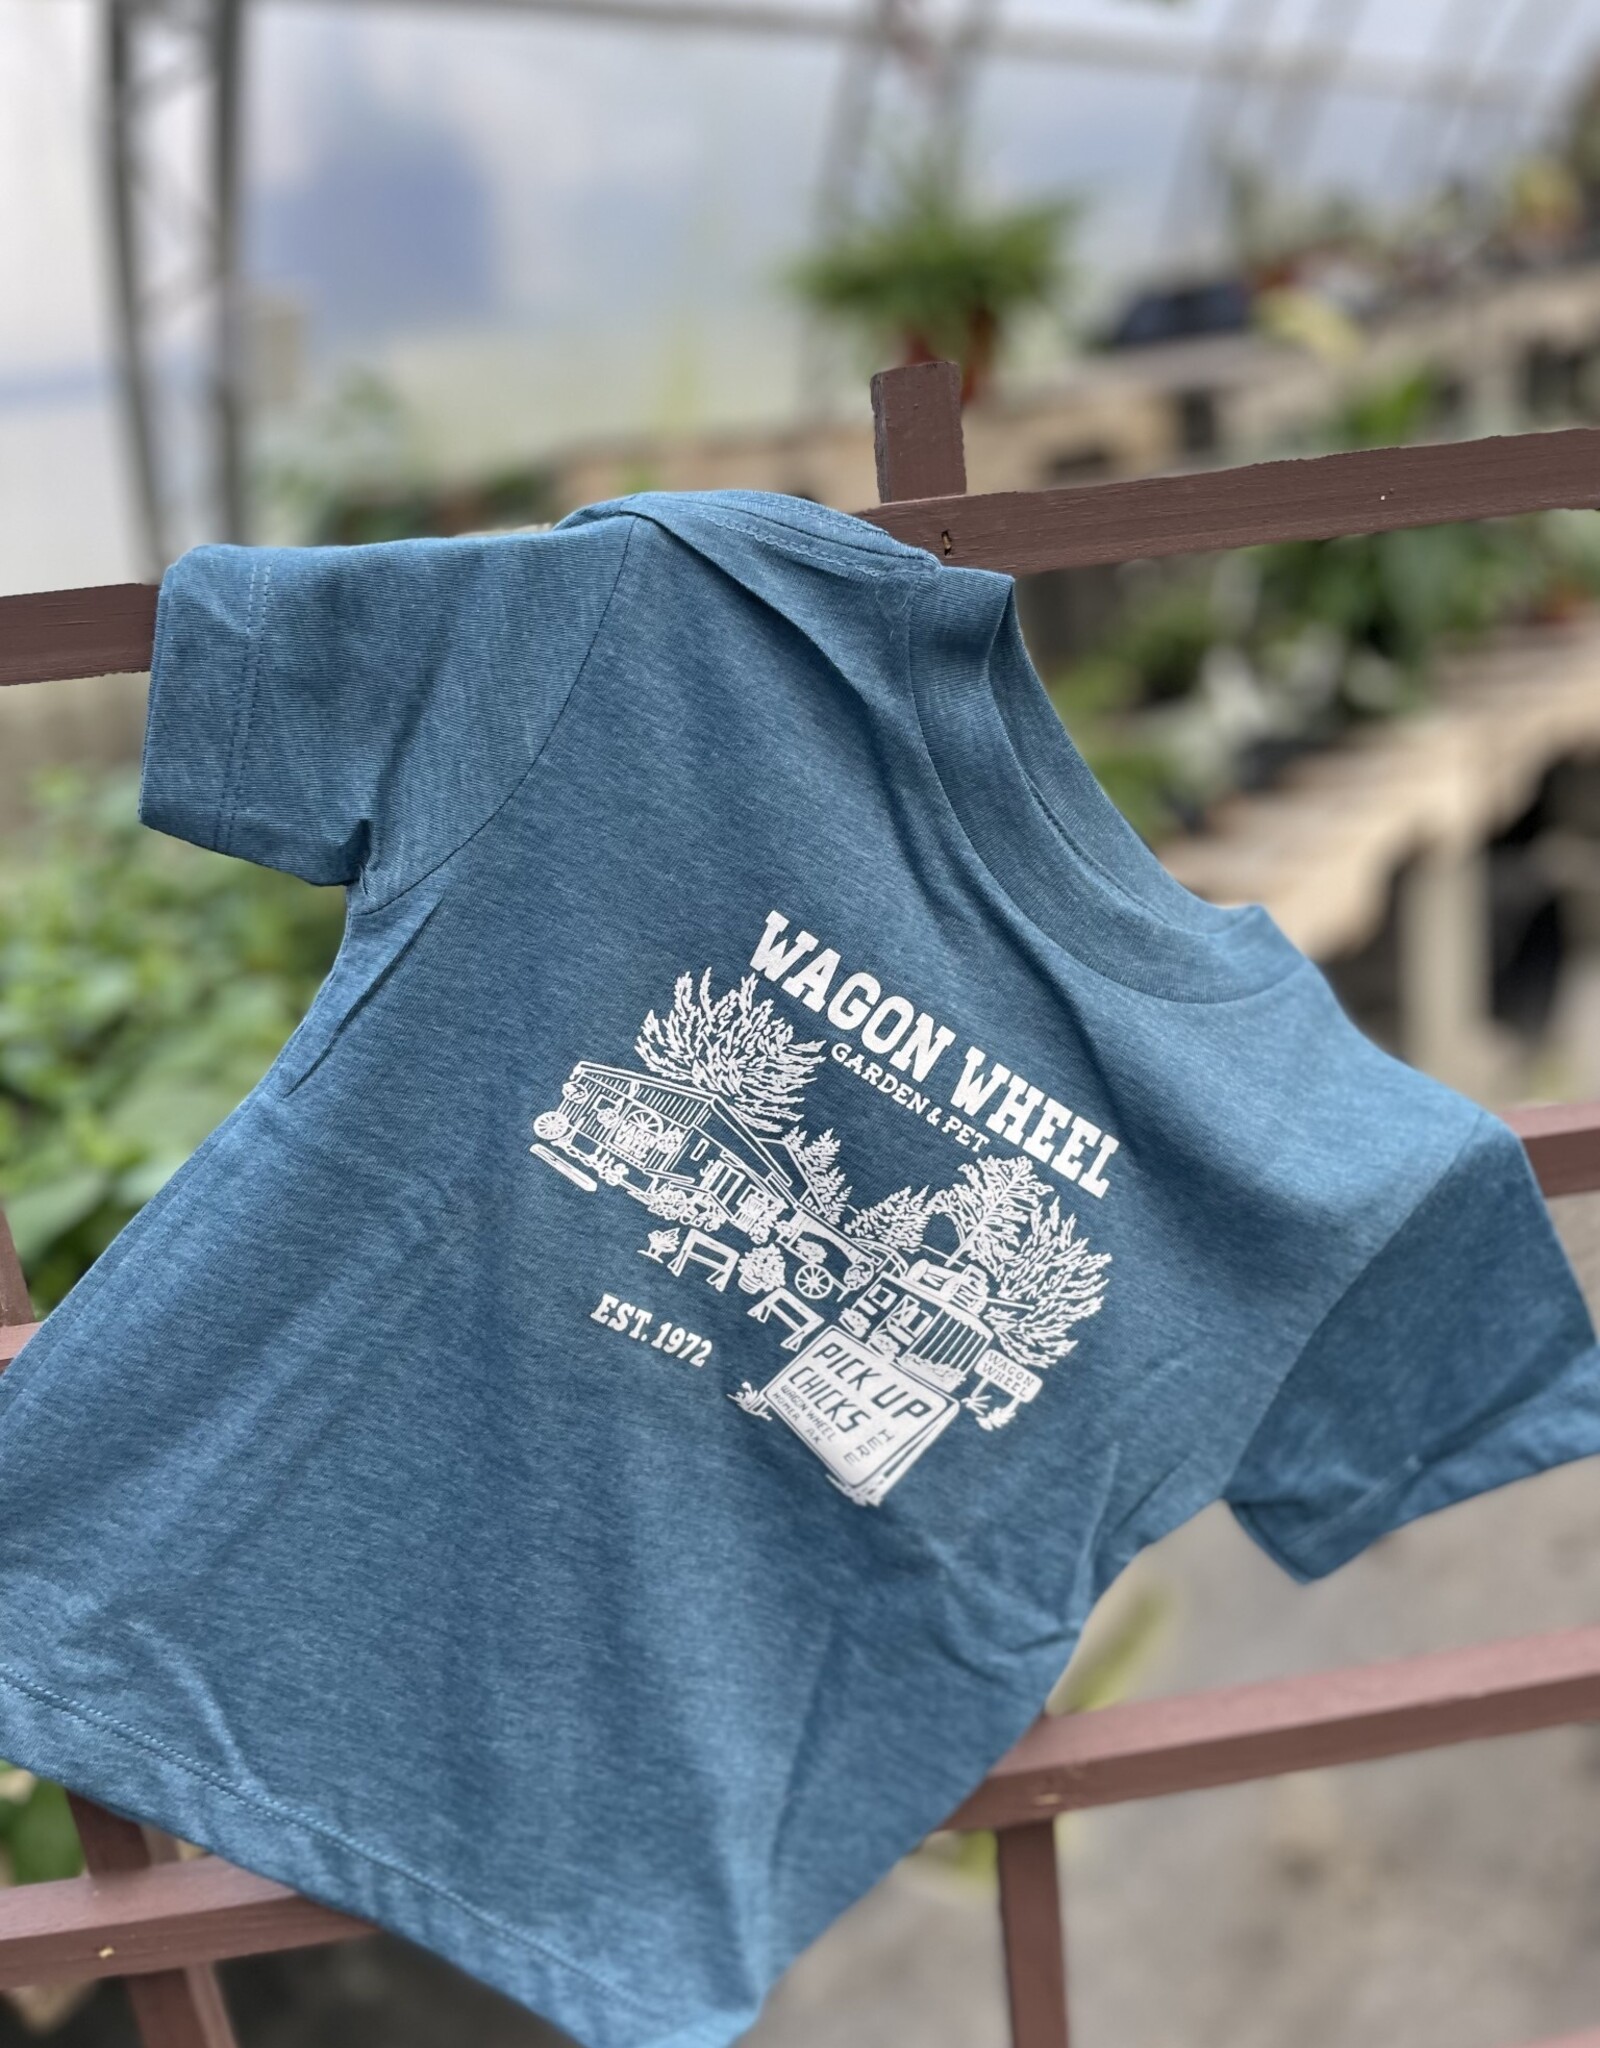 WW Youth/toddler t-shirt